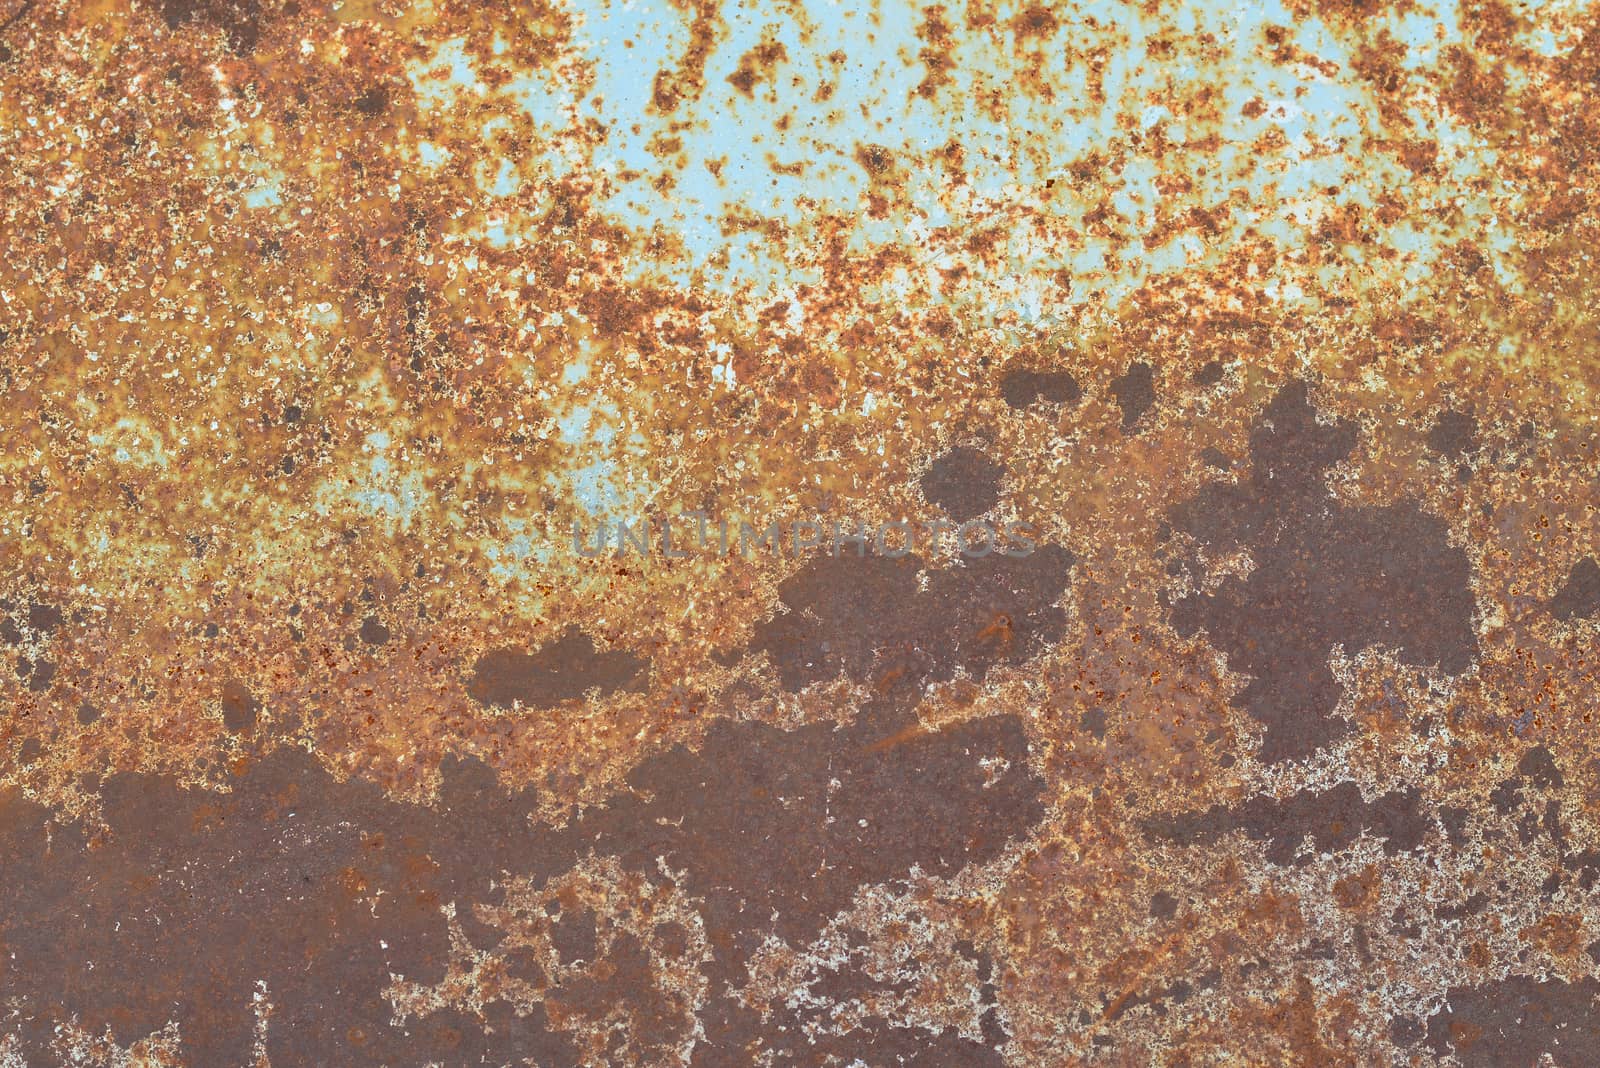 Old rusty metal surface. Close up industrial background